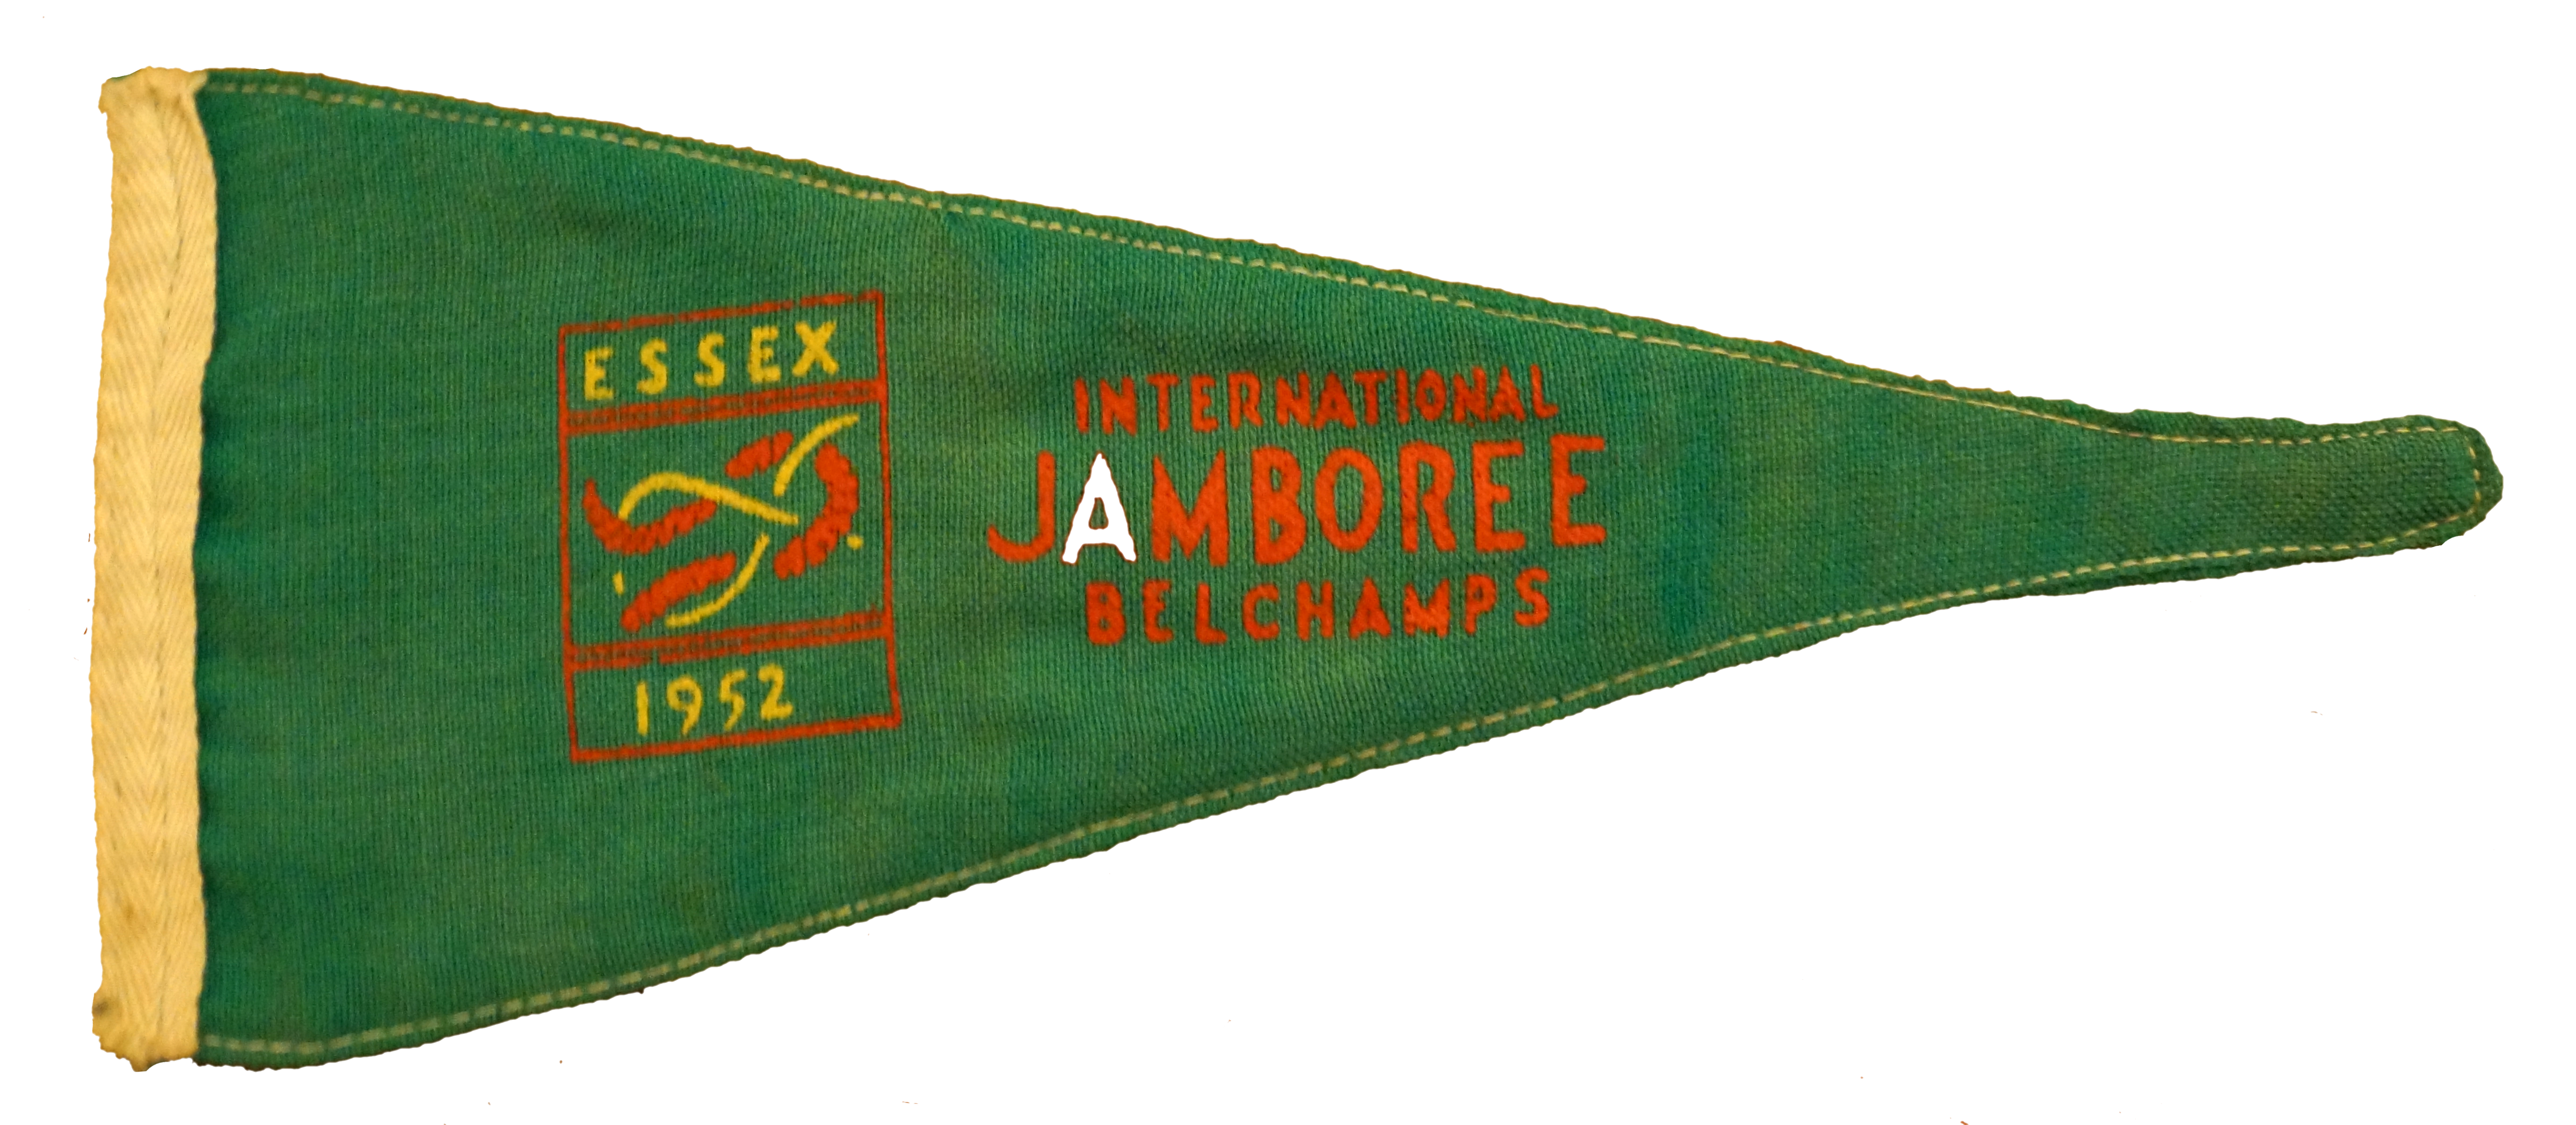 Belchamps Jambree Scout Banner Pennant 1952